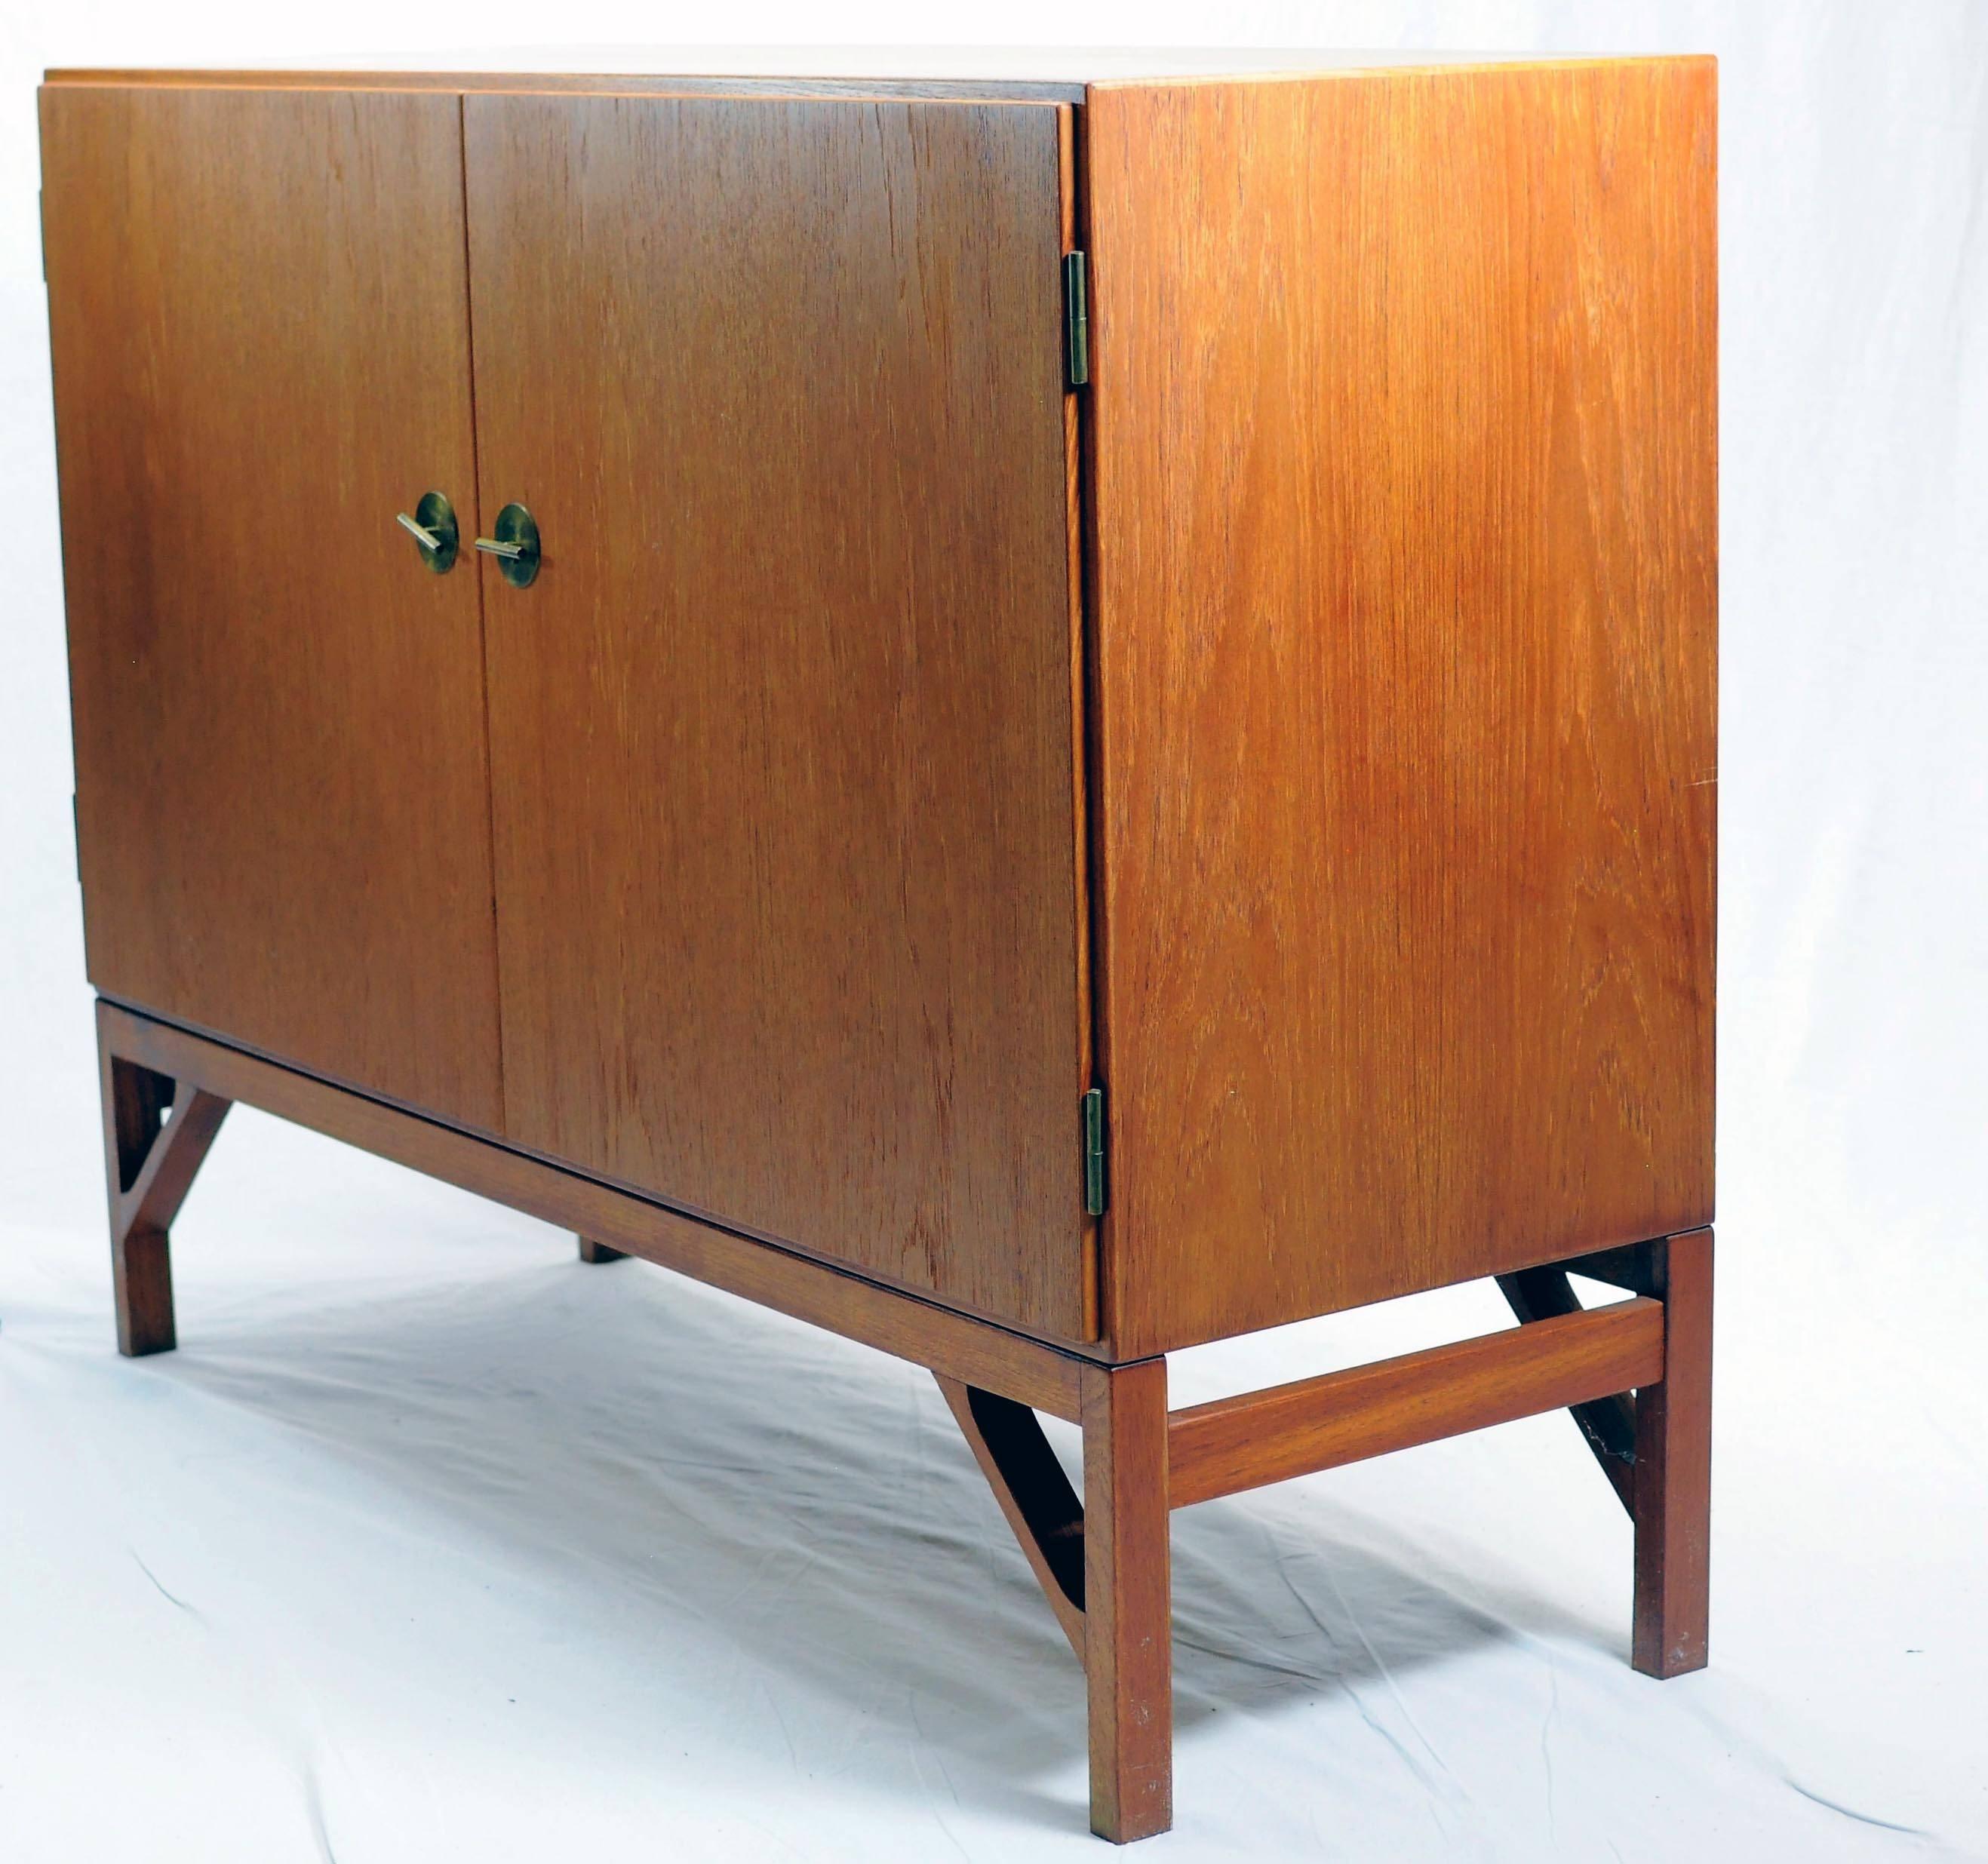 Well crafted Børge Mogensen oak sideboard manufactured by C.M Madsen for FDB ion the 1960s.

The spacious sideboard is in very good condition and features front doors decorated with brass grips that also serve as keys and a very spacious inside